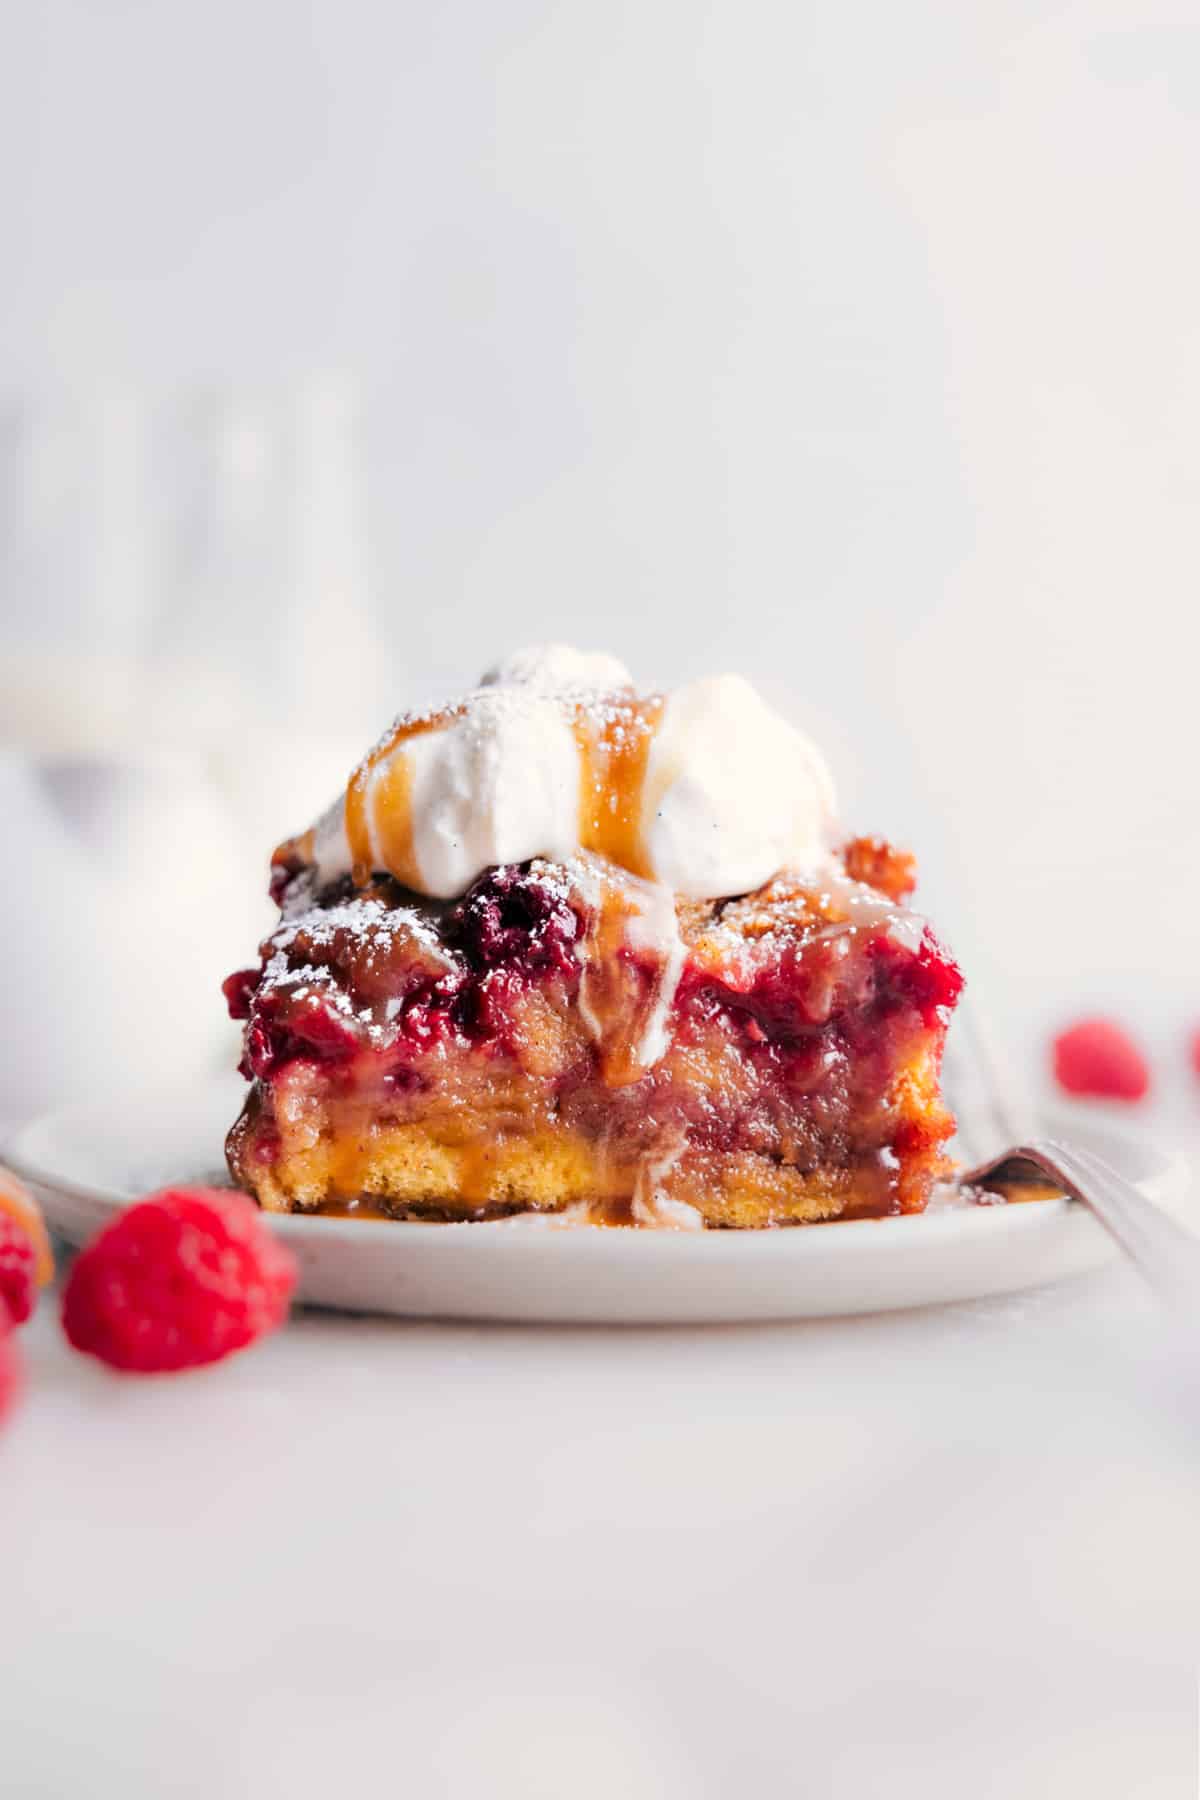 Slice of Raspberry Bread Pudding on a plate ready to be enjoyed.